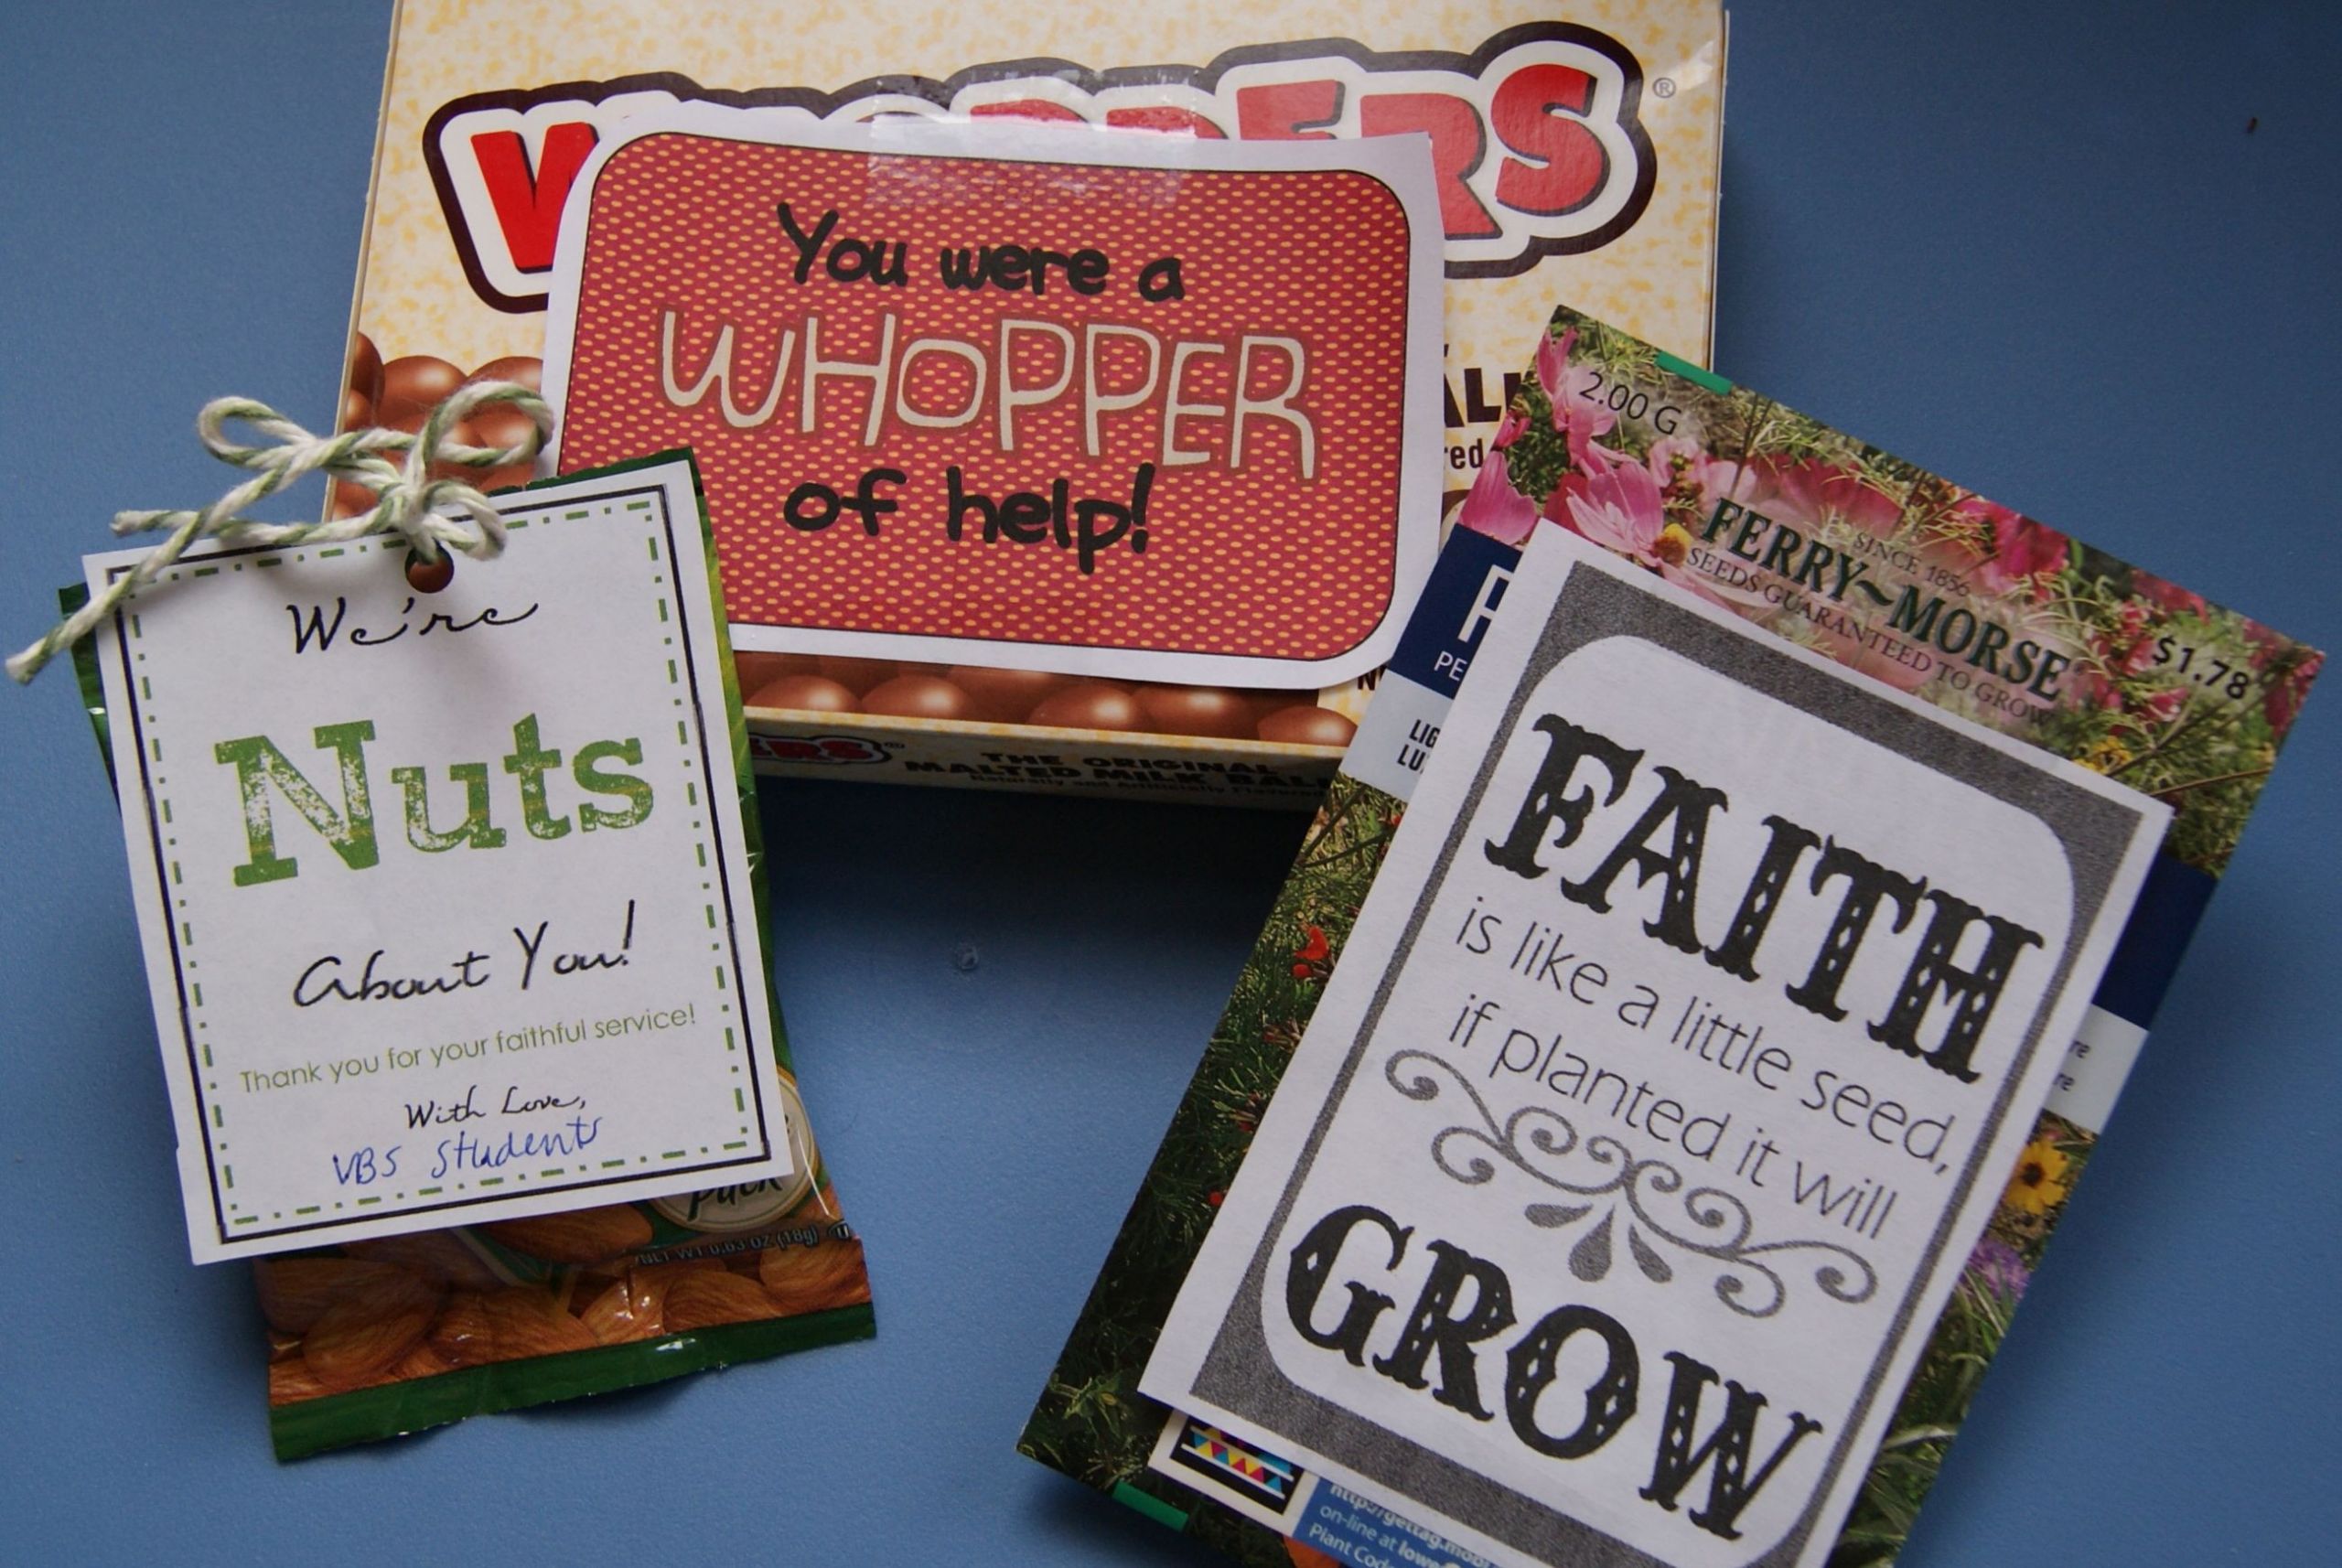 Volunteer Thank You Gift Ideas
 3 Volunteer Recognition Gifts for Sunday School VBS